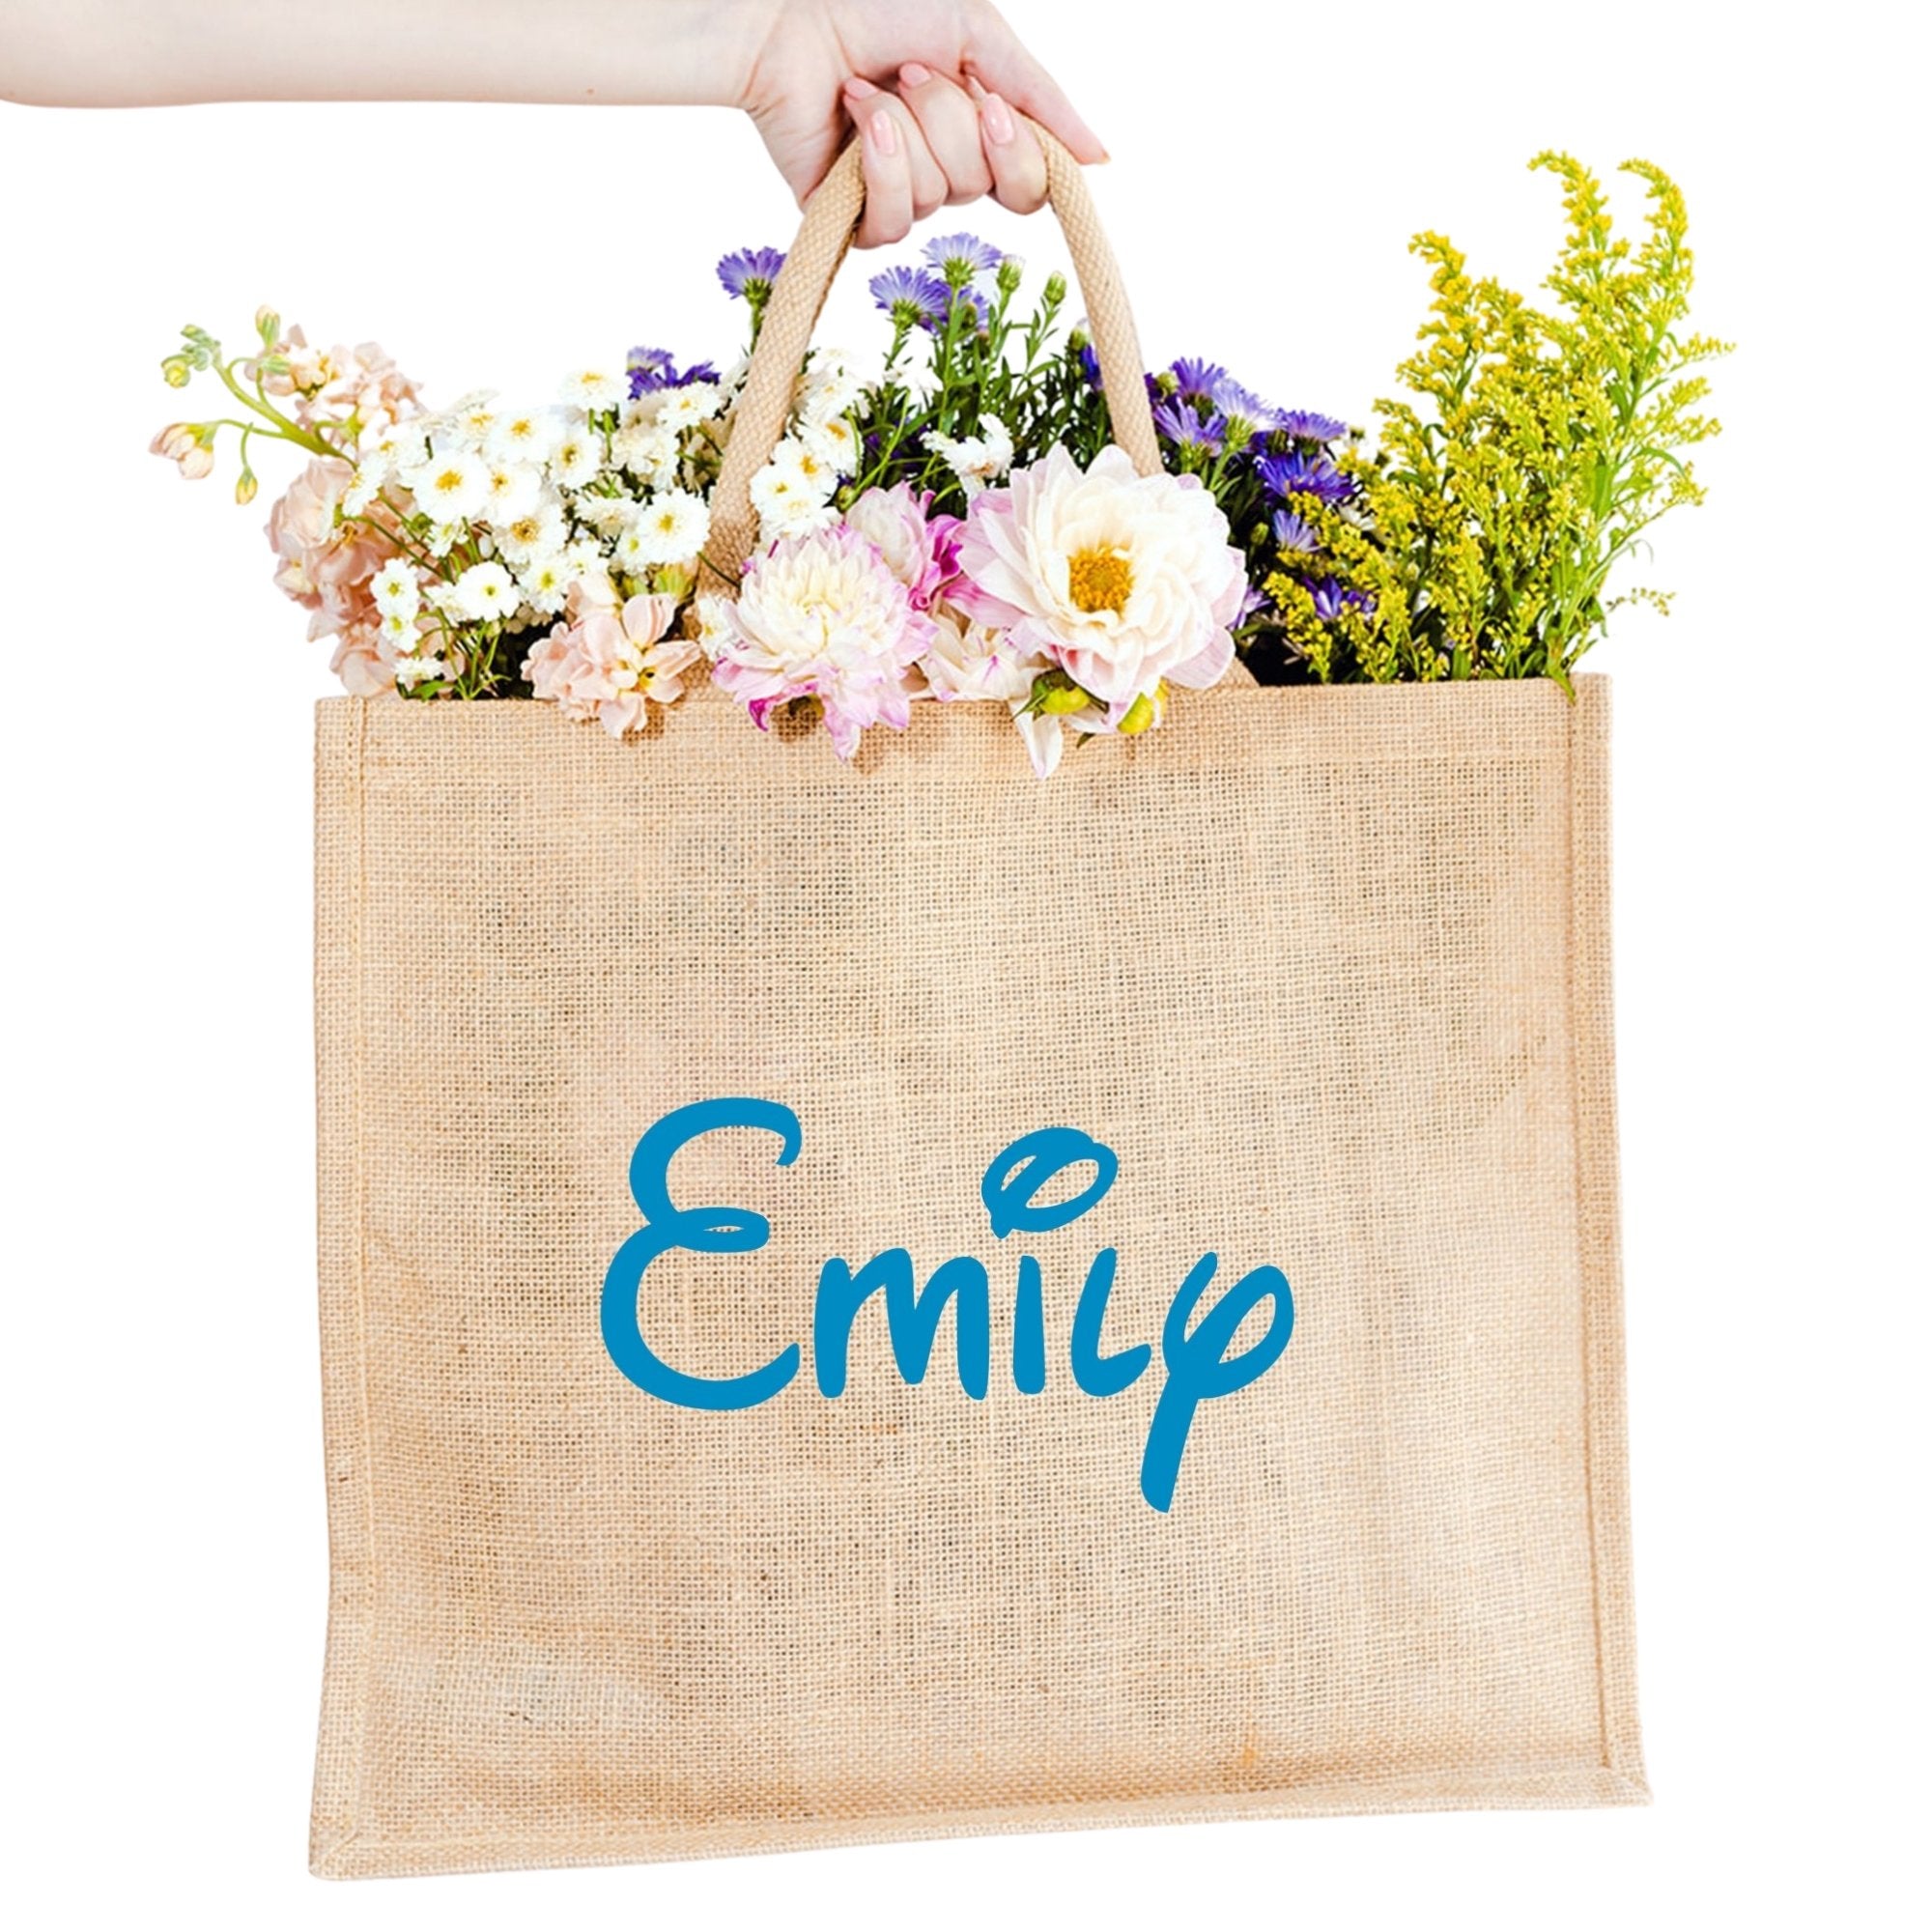 A custom jute bag reads "Emily" on the front in Magic Adventure Park font